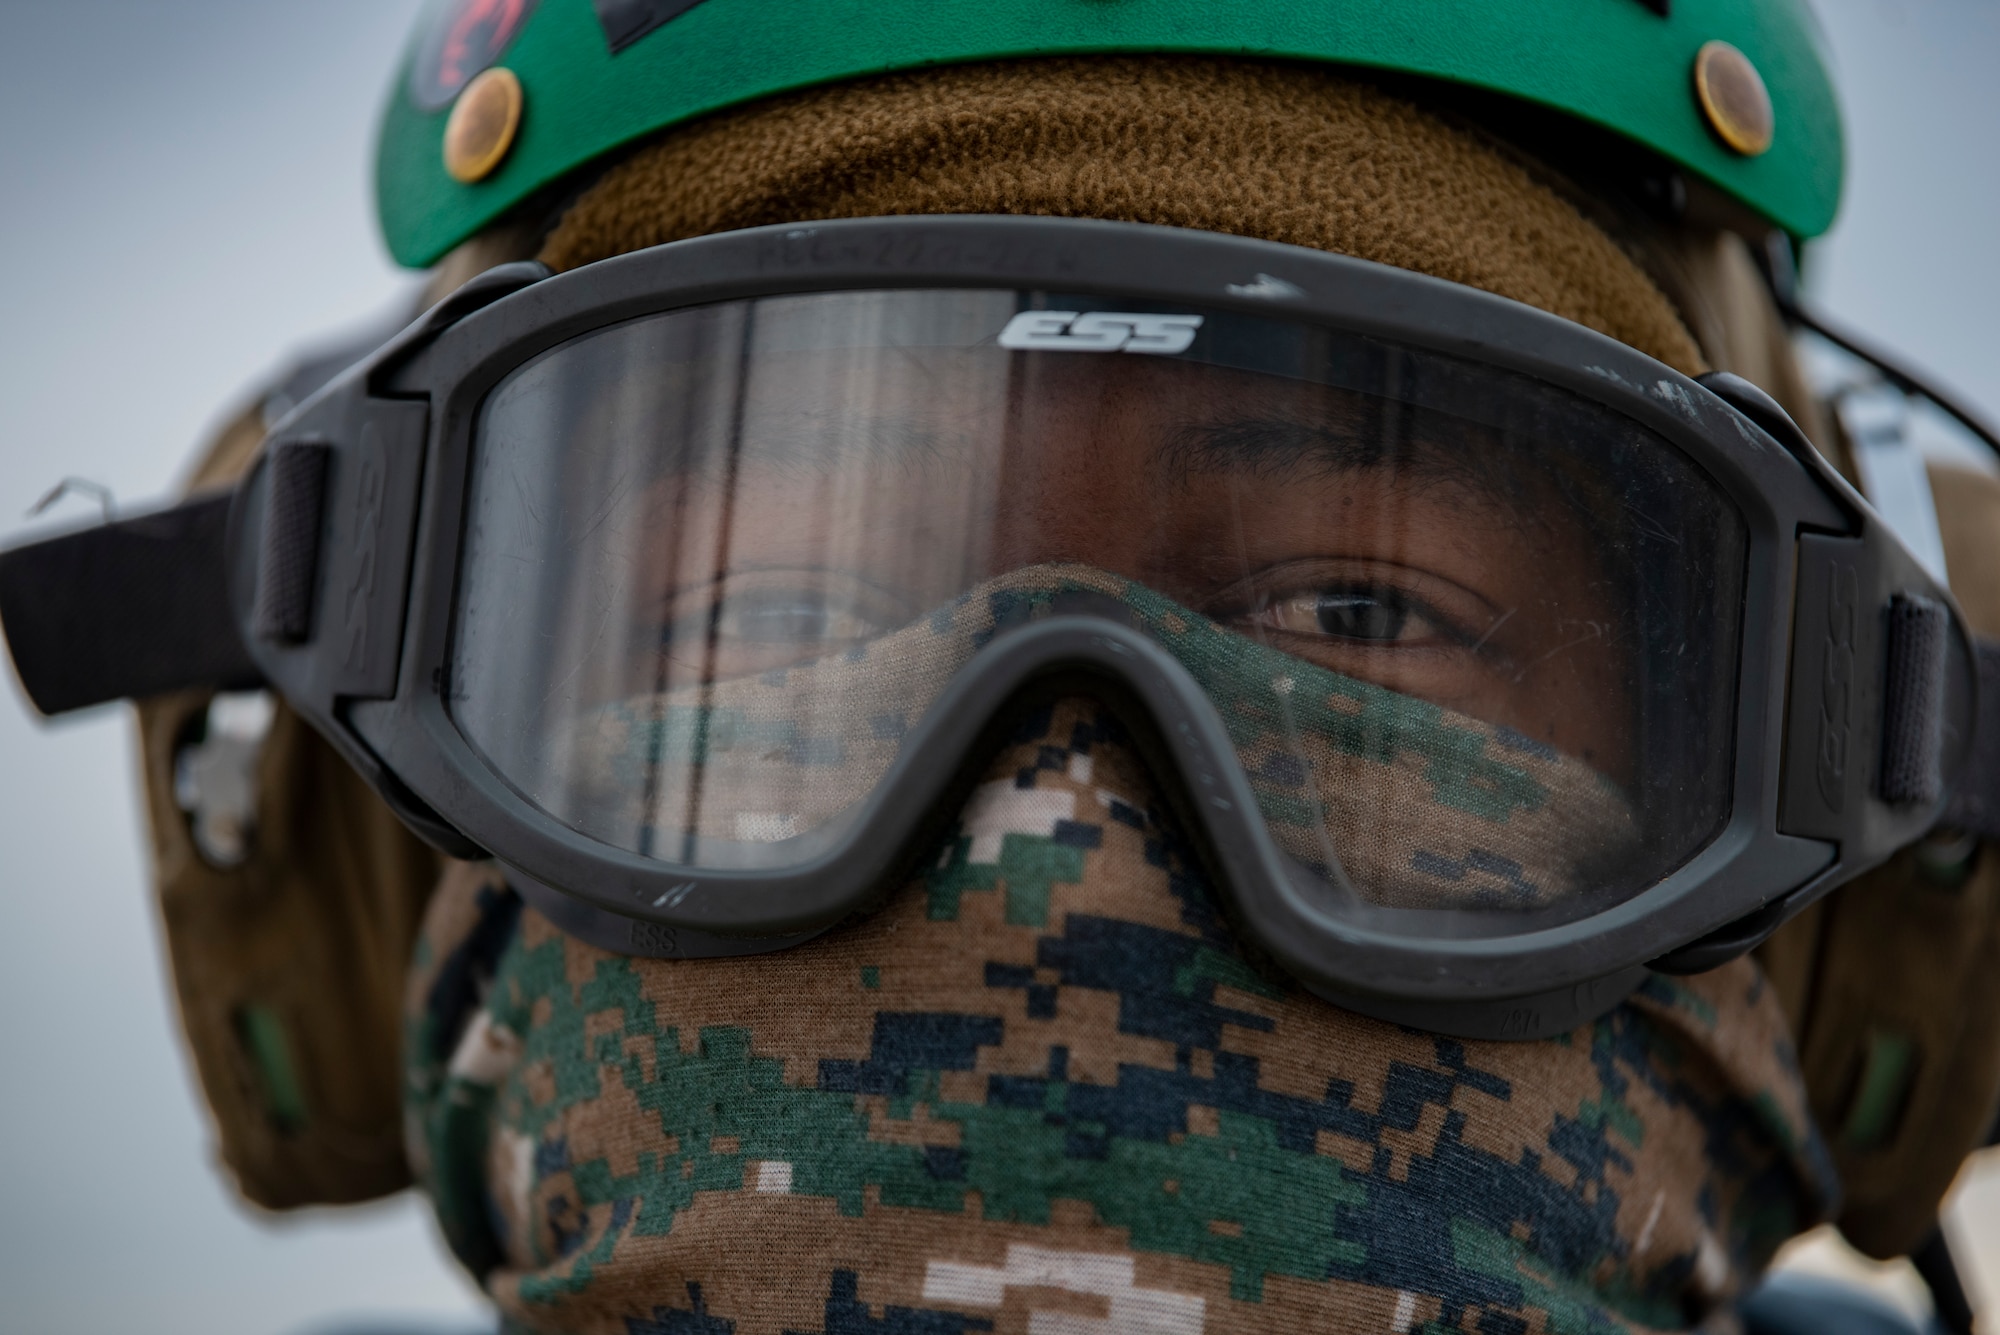 U.S. Navy Airman poses for a photo.